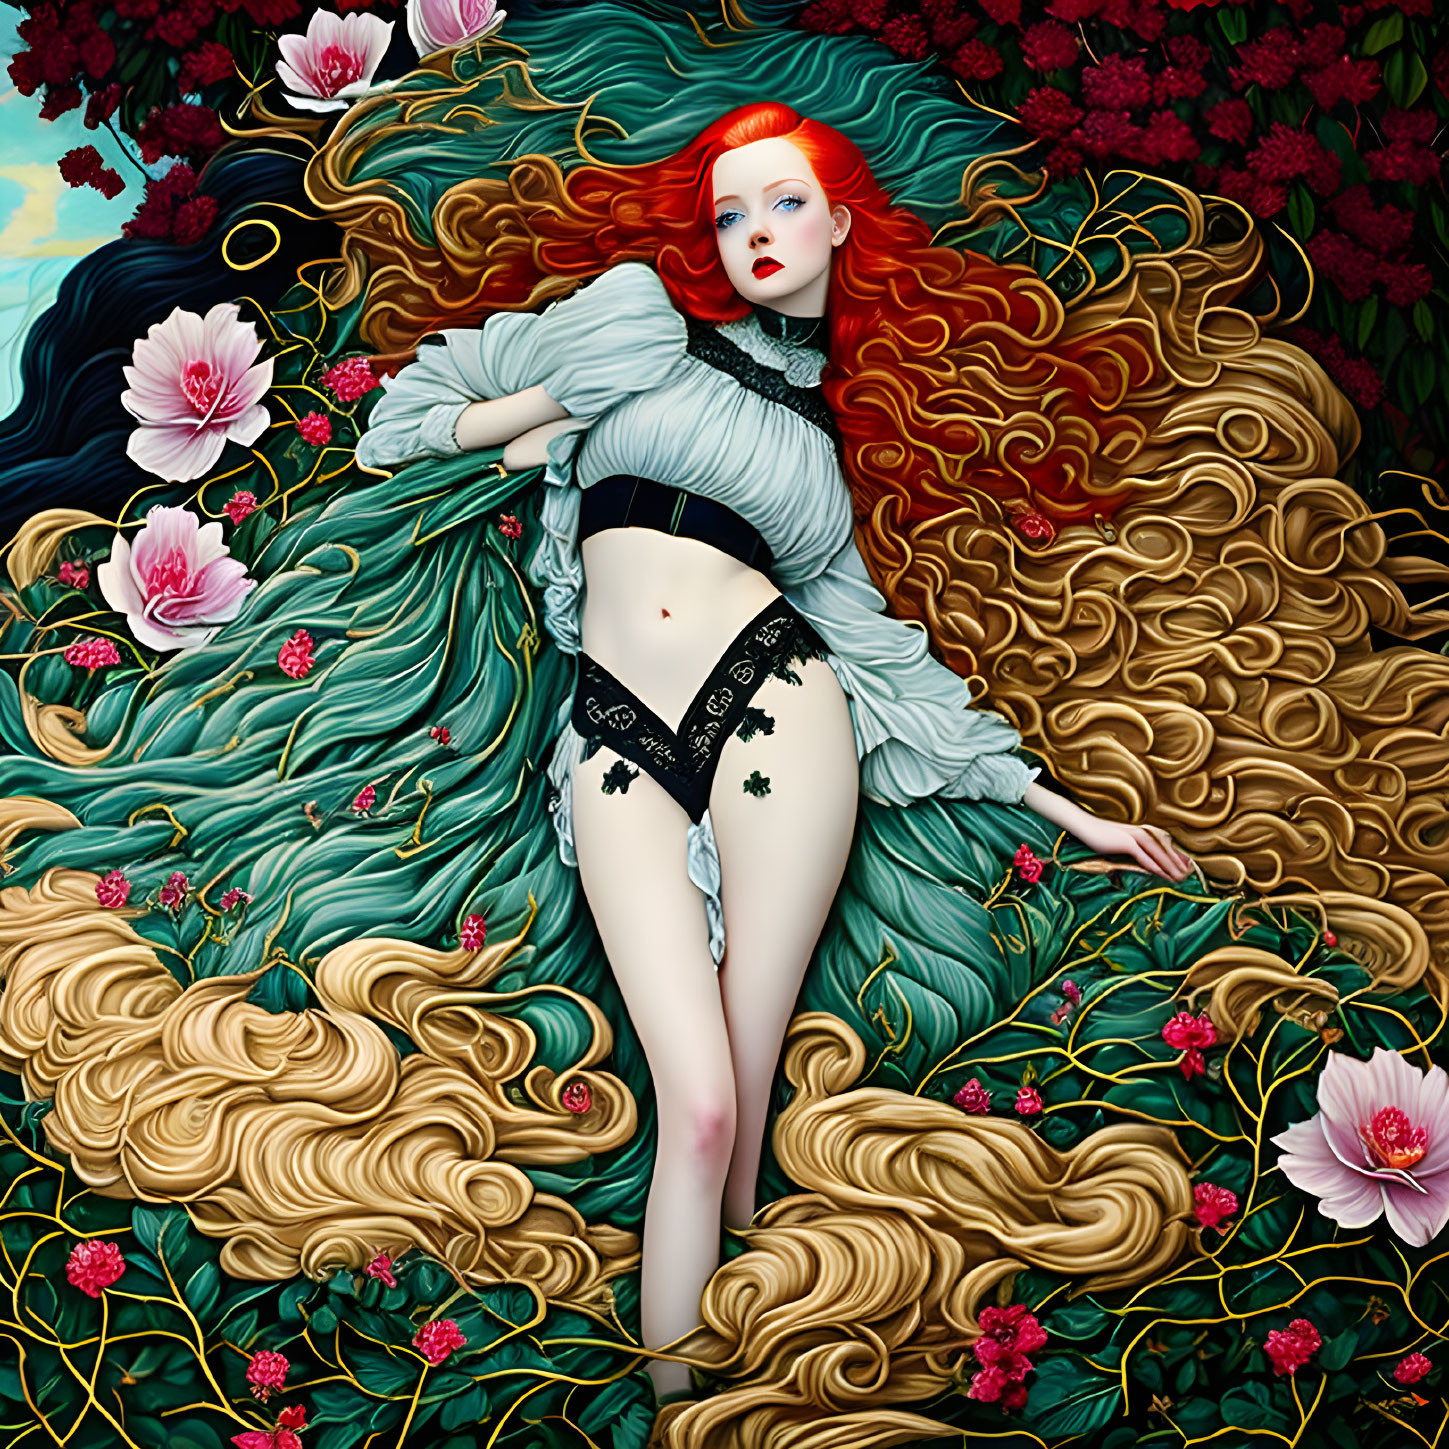 Stylized art nouveau illustration of a red-haired woman in floral setting